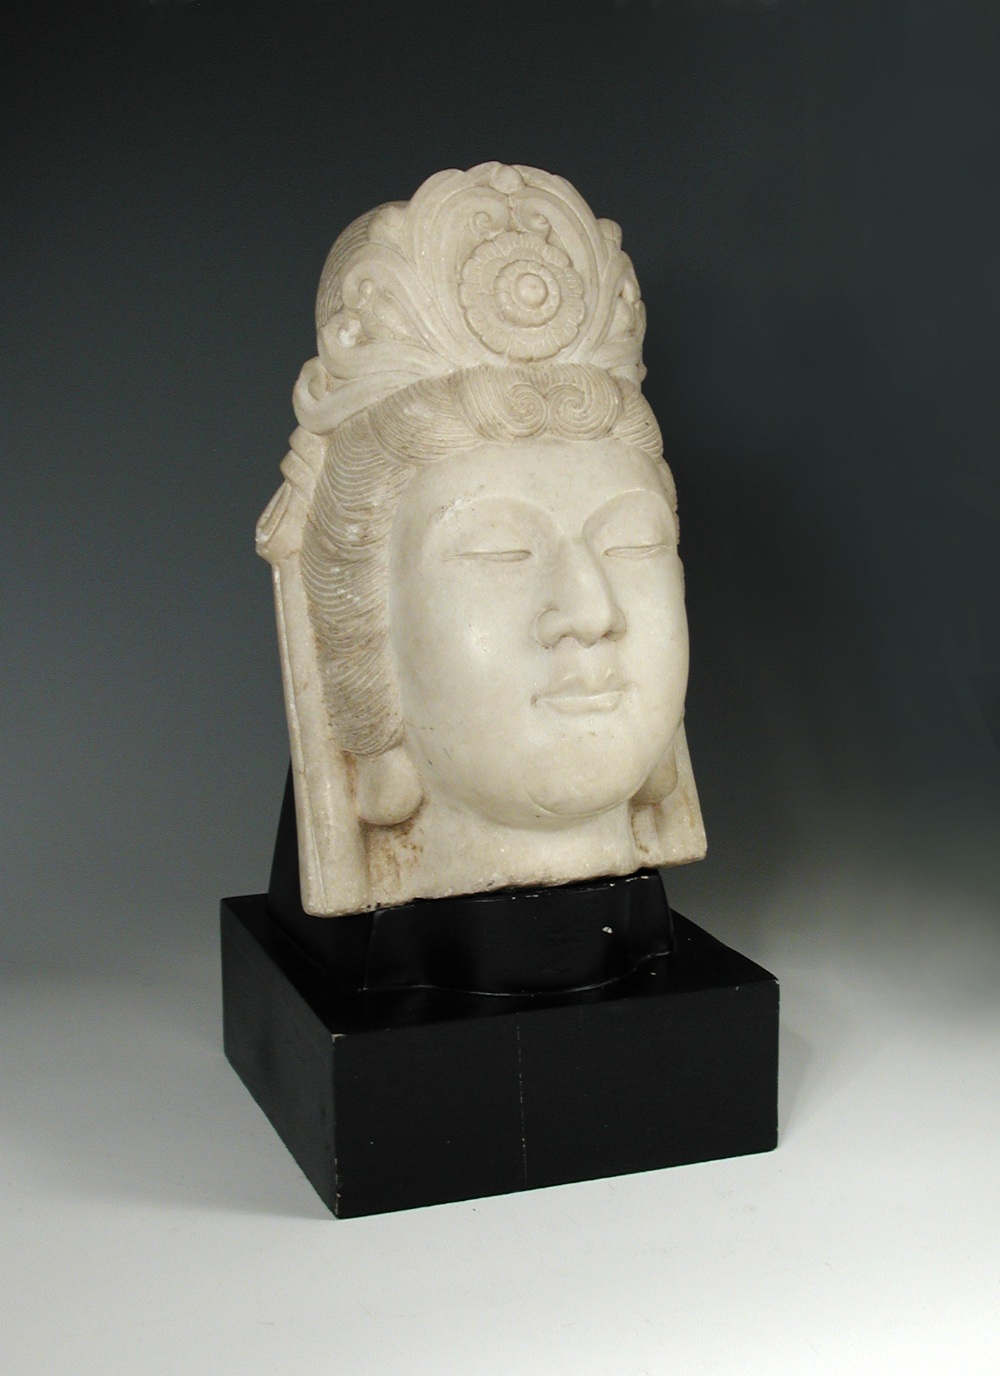 A late 19th/early 20th century white marble head of Guanyin, her headdress centred by a rosette